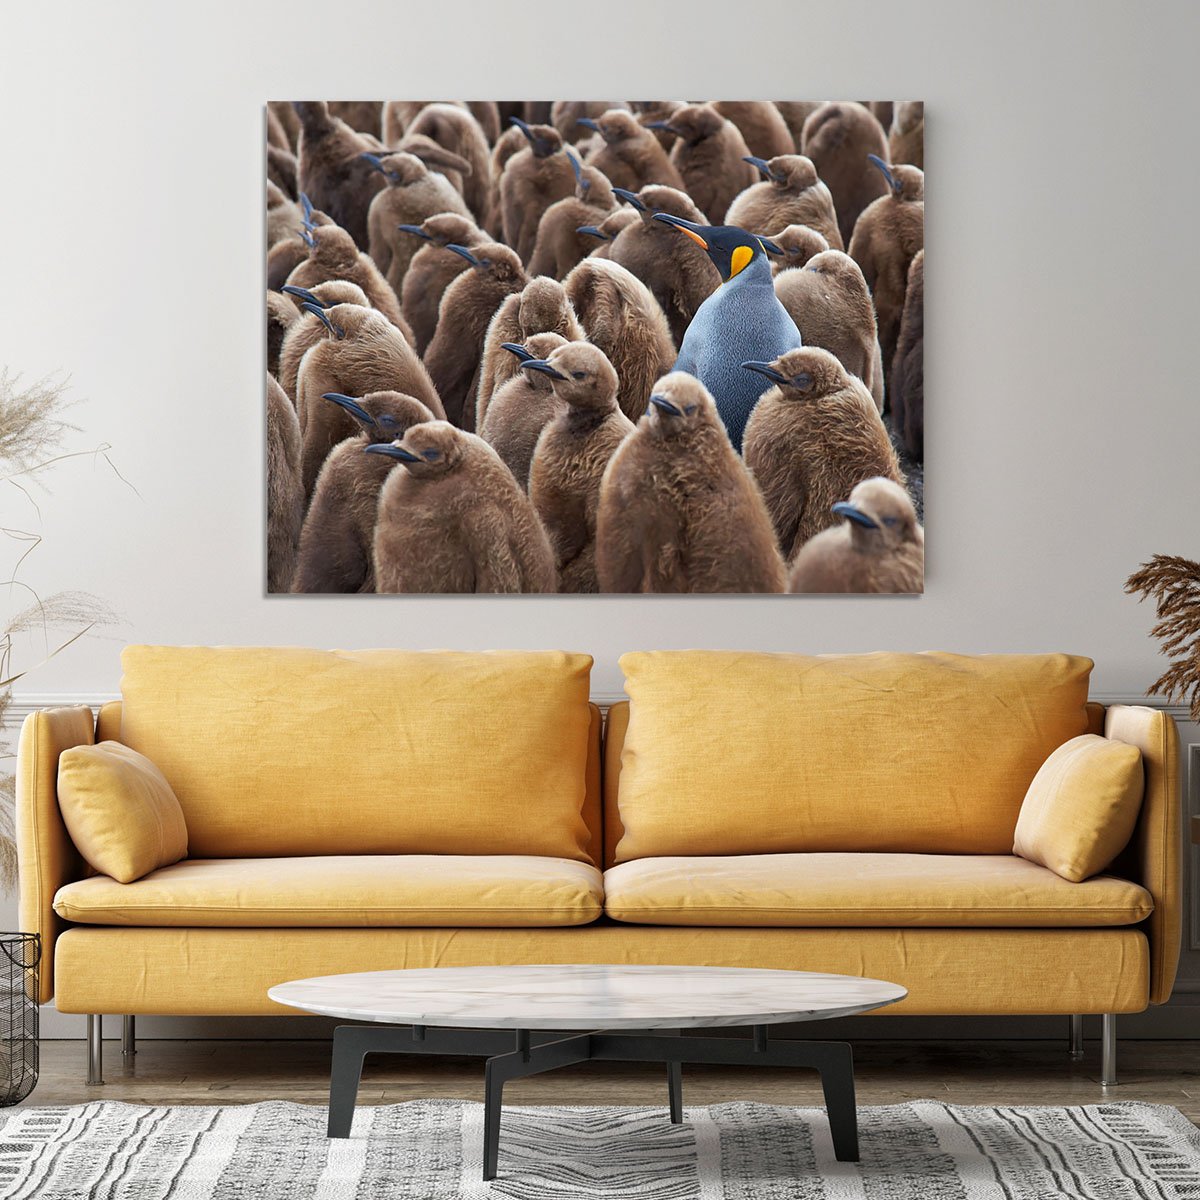 Adult King Penguin Aptenodytes patagonicus standing amongst a large group Canvas Print or Poster